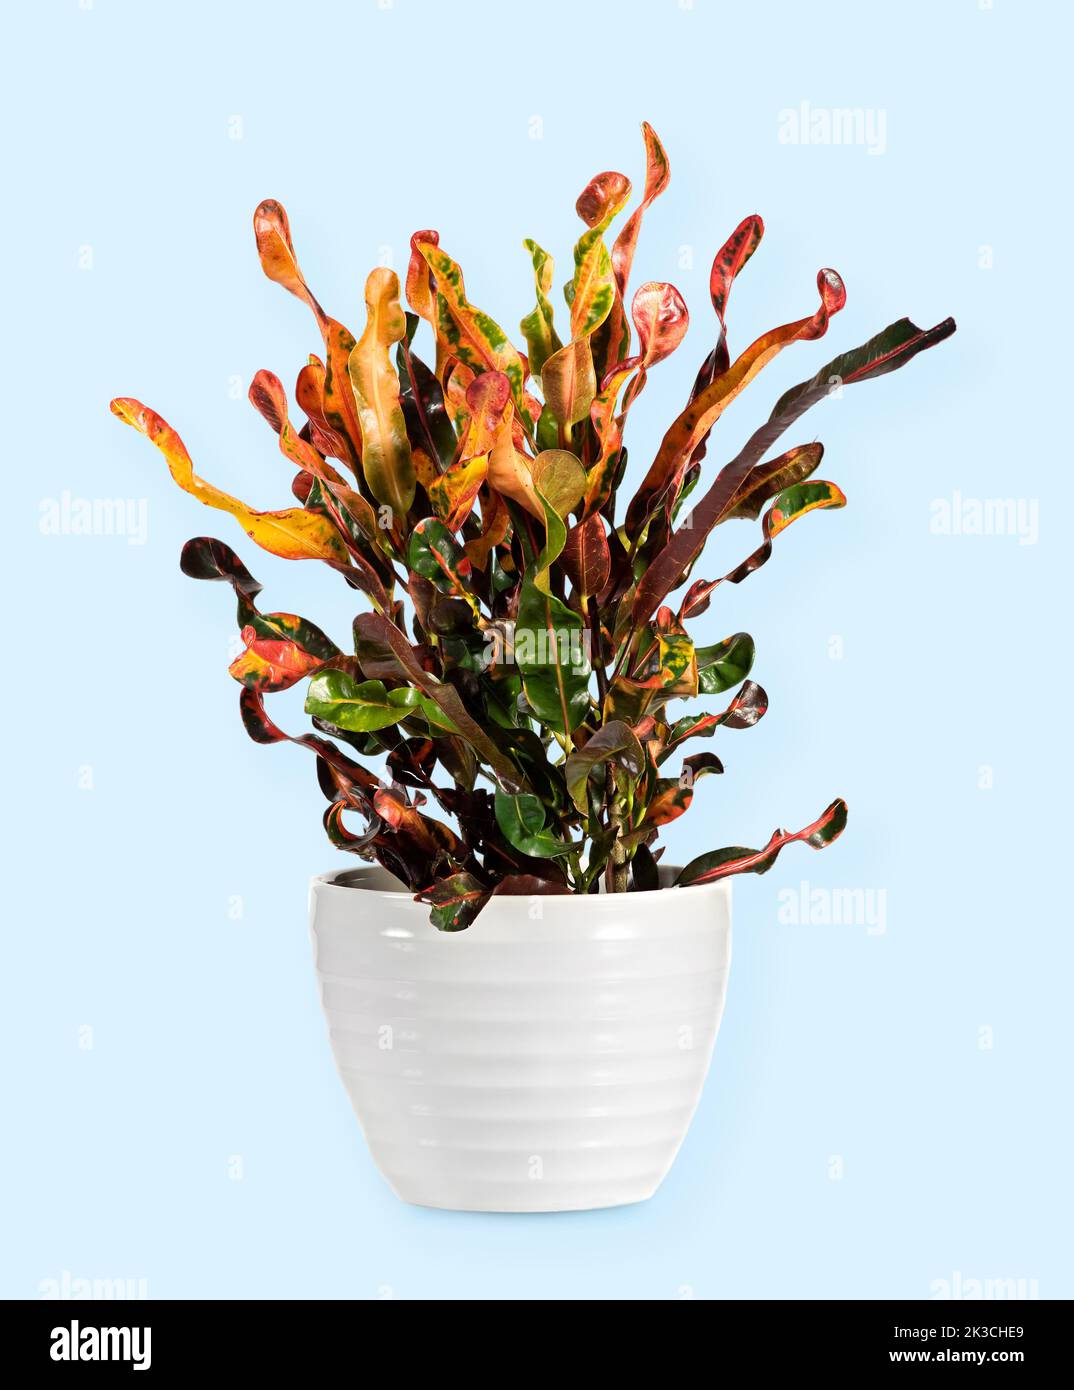 Isolated croton with green and yellow leaves growing in white ceramic pot against blue background in studio Stock Photo